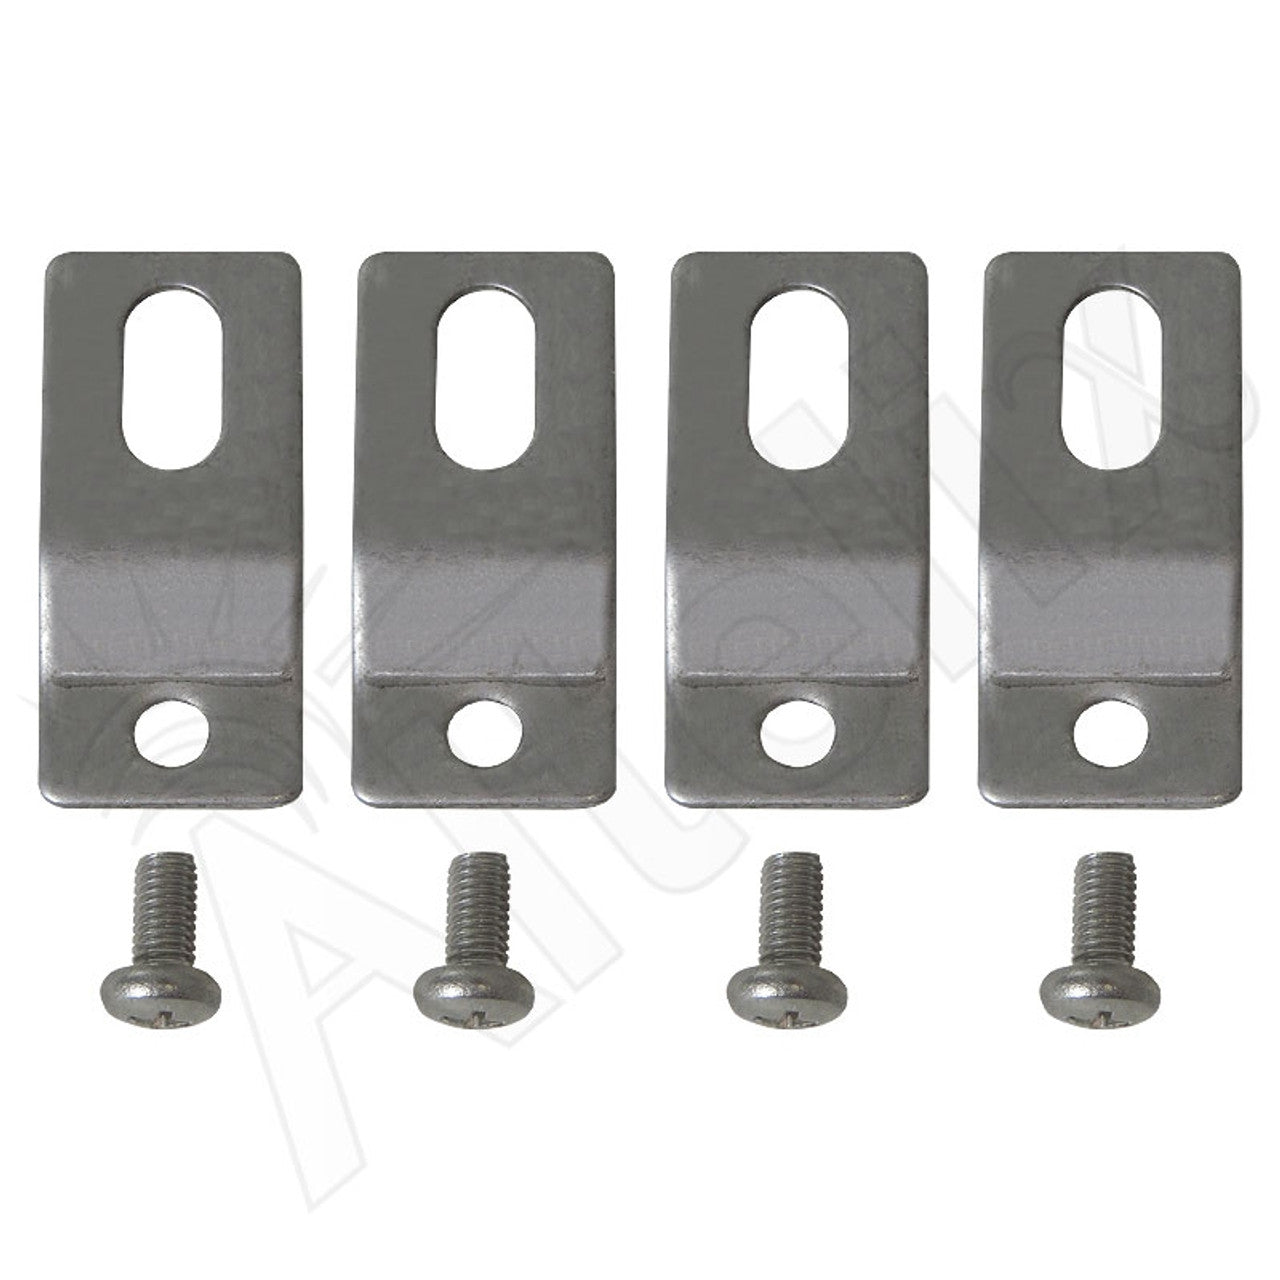 Stainless Steel Wall Mount Kit for Altelix NF141206 & NF141208 Series Enclosures